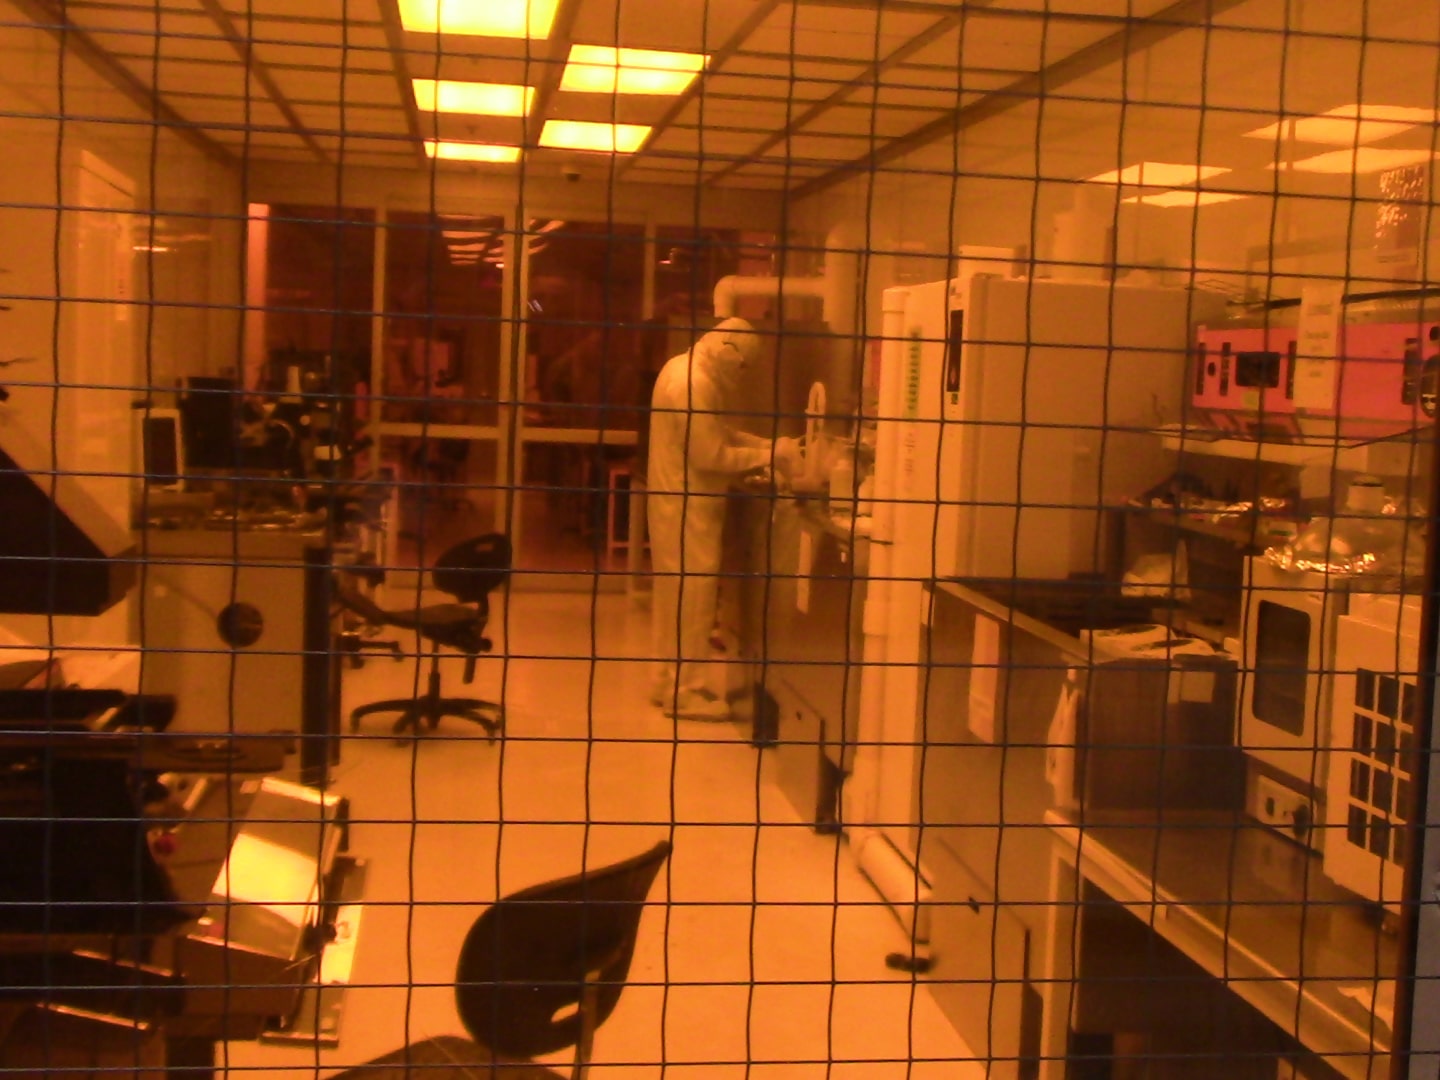 nantech clean room lab space with a researcher working viewed through a window